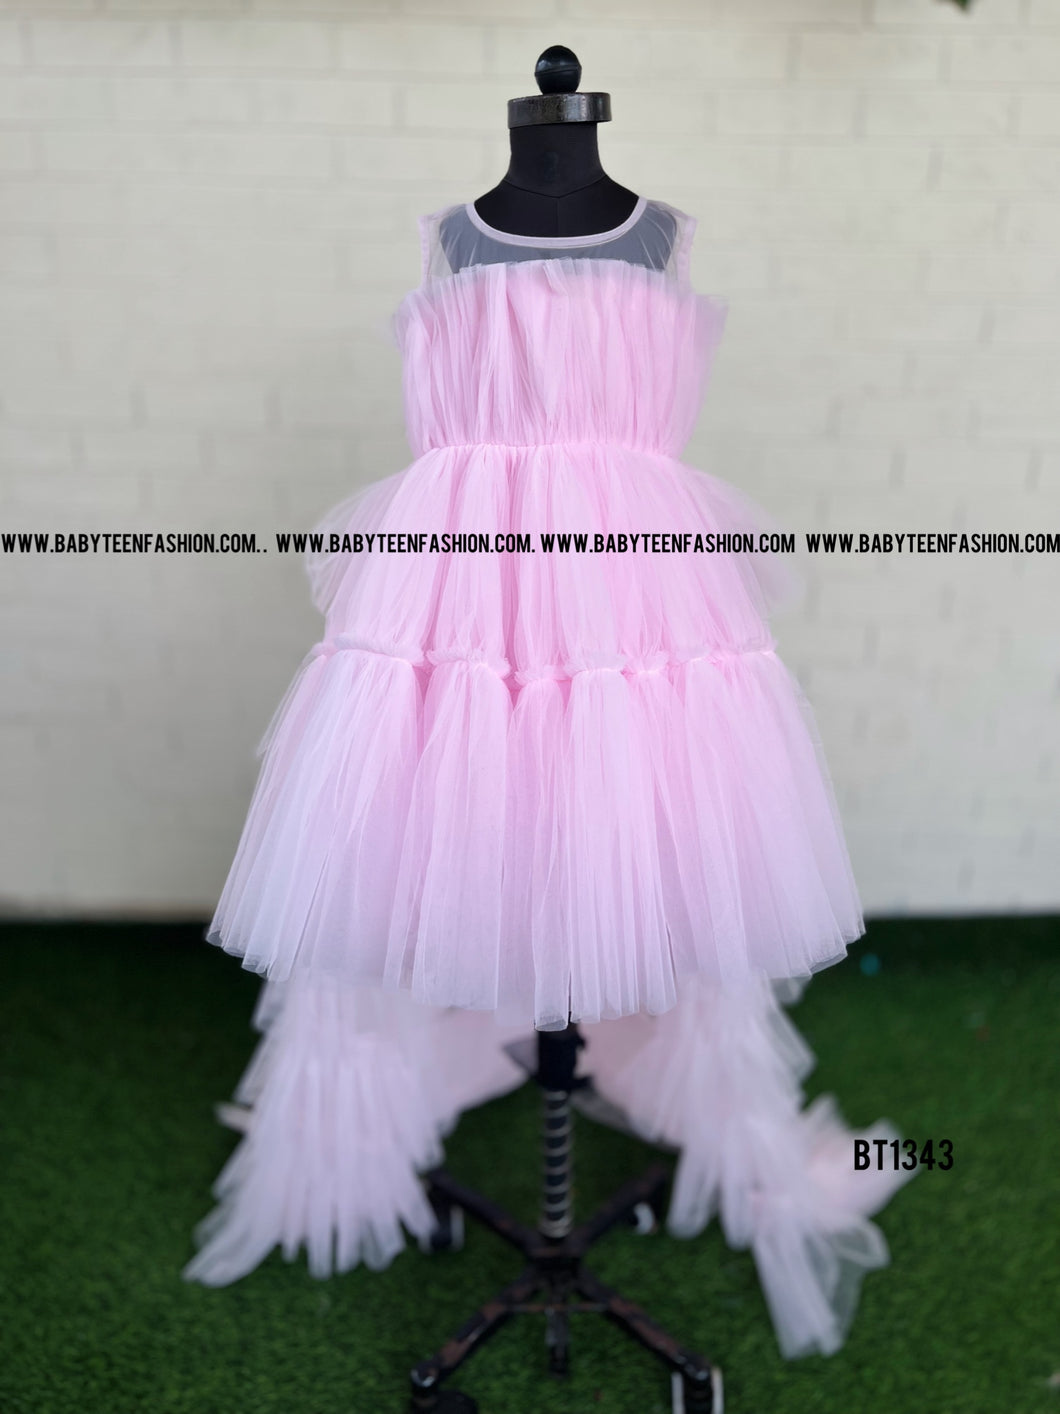 BT1343 Party wear Pink Detachable Long Tail Frock for Baby and Teenage Girls